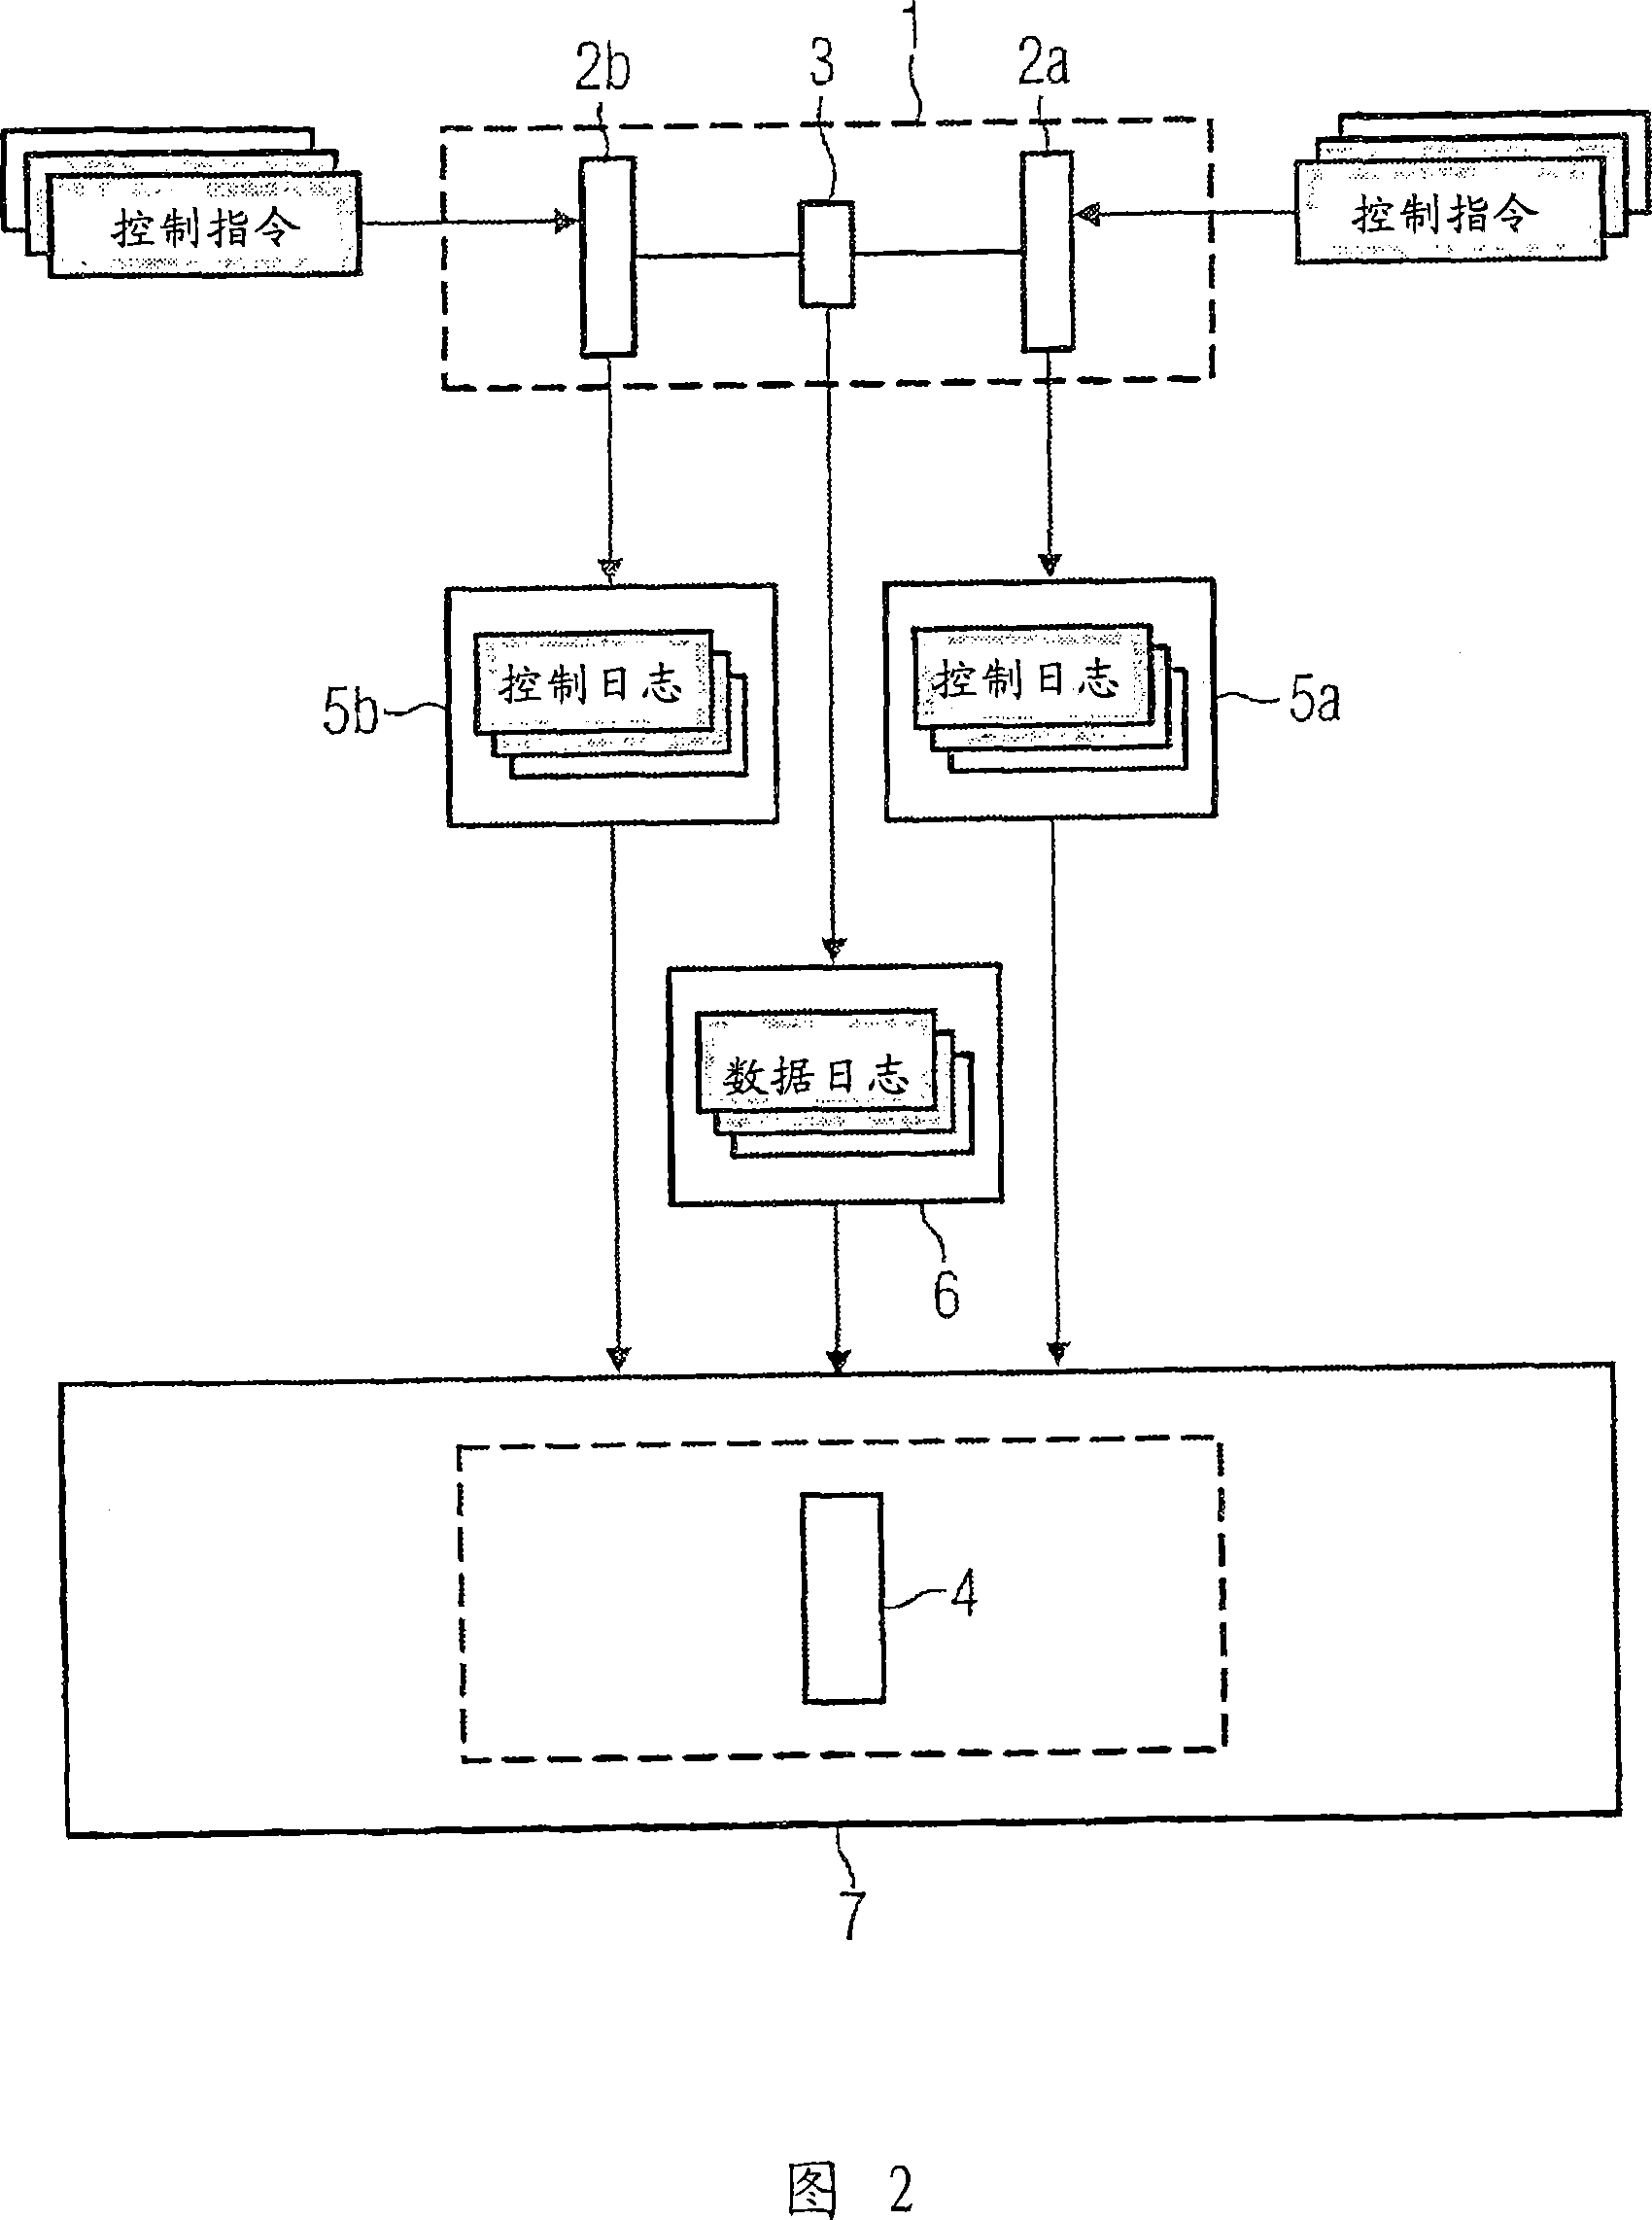 Method for simulating a technical installation